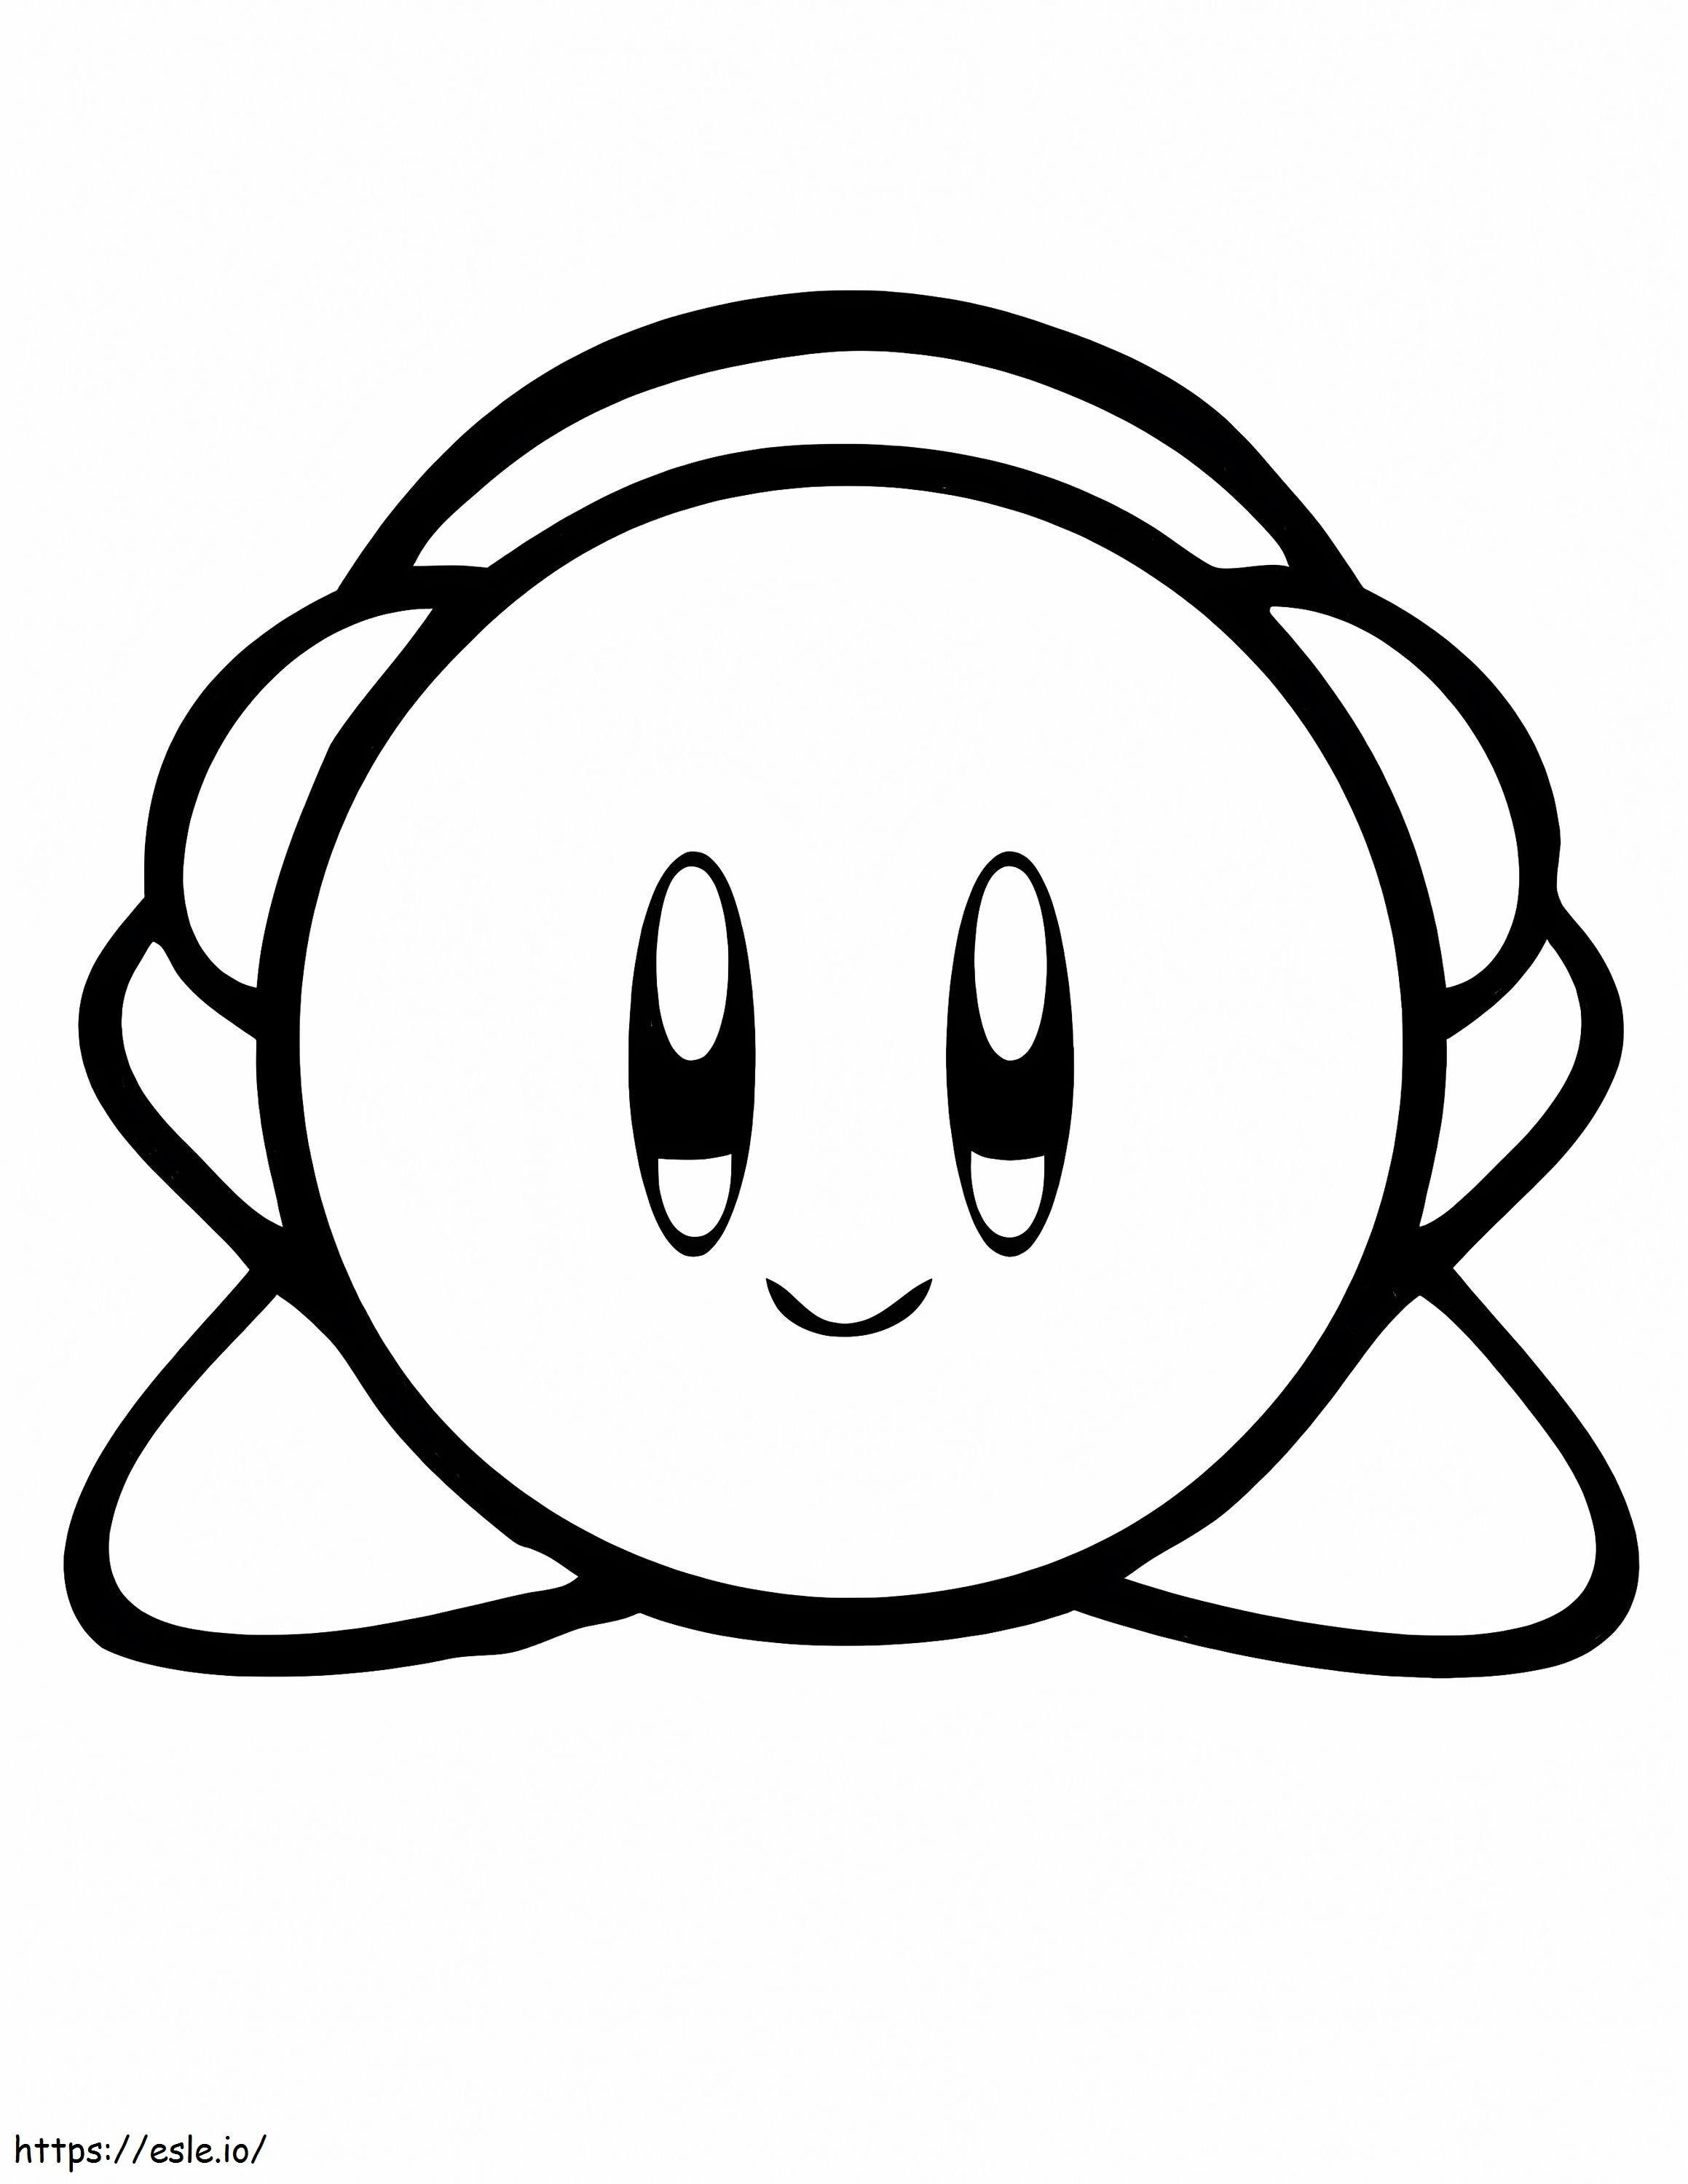 Kirby Is Cute coloring page